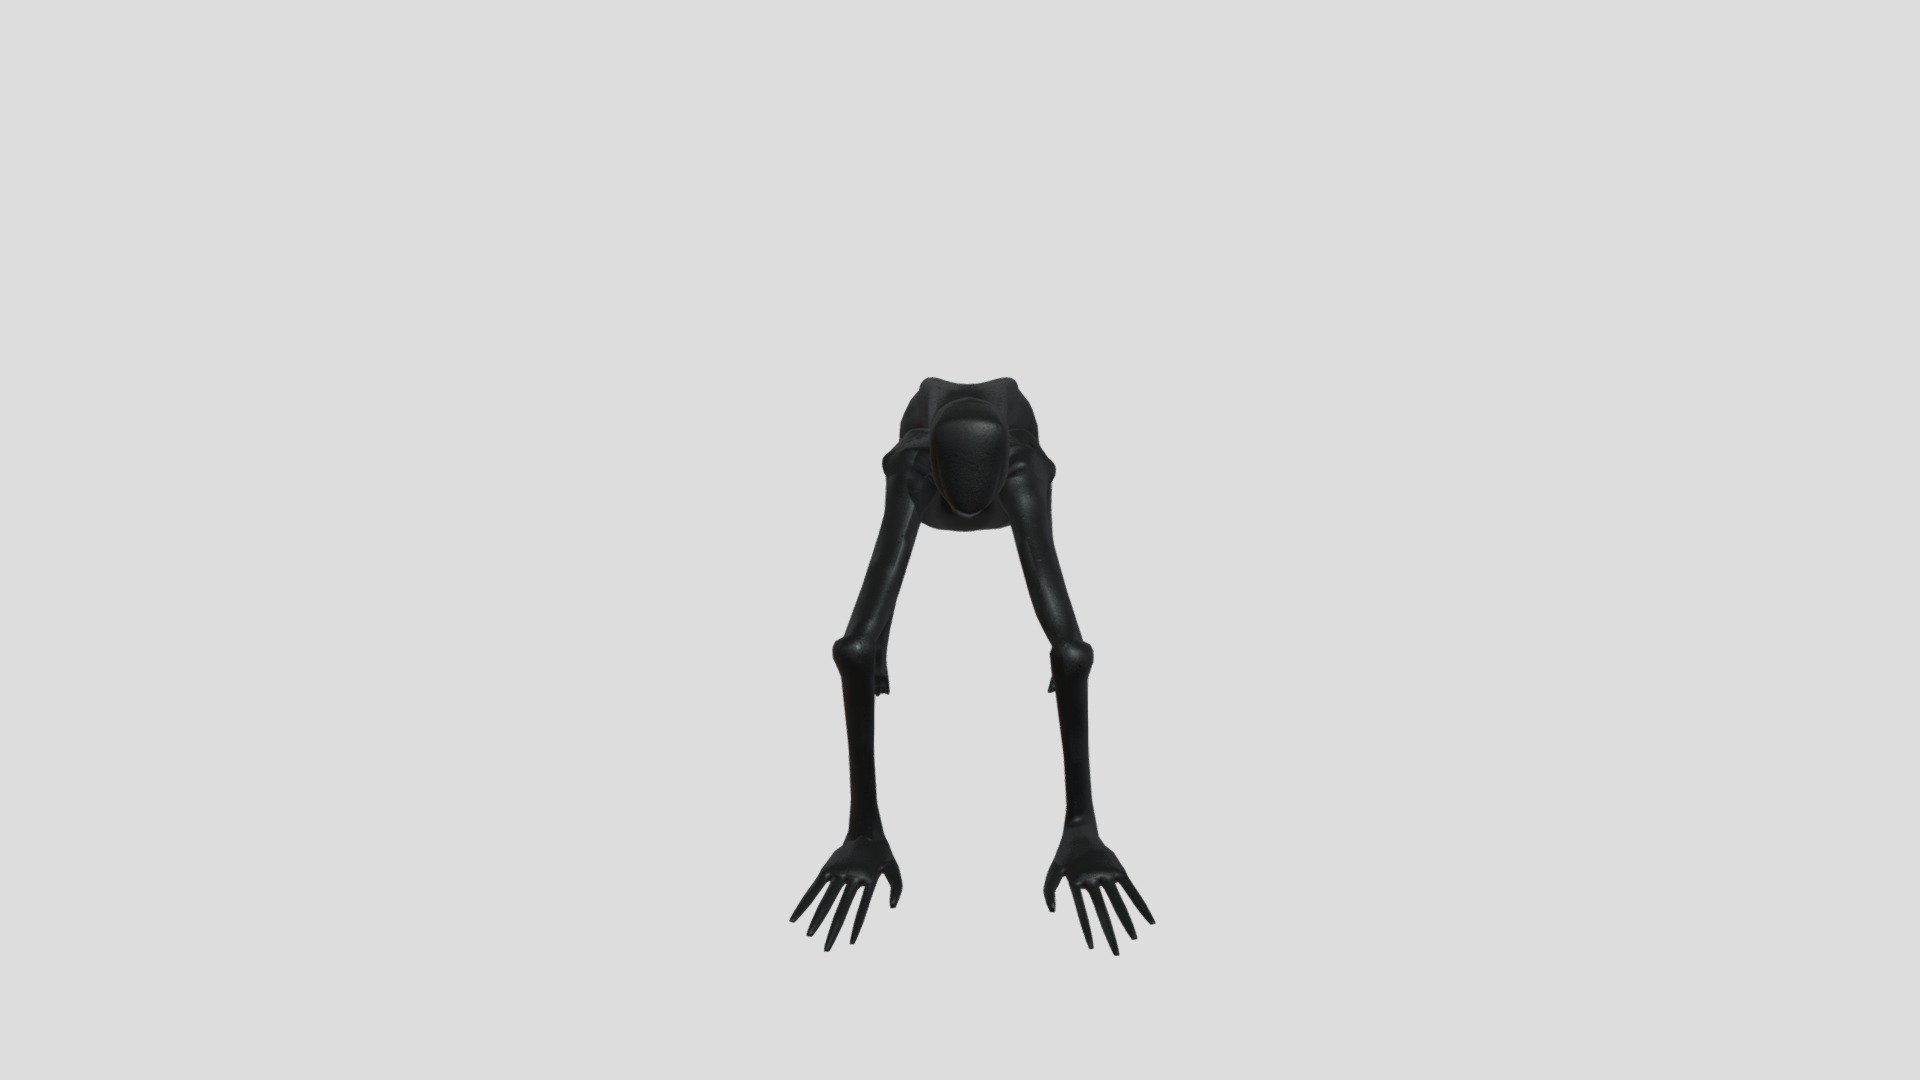 Apeirophobia Entities - Download Free 3D model by cthulhu903 (@cthulhu903)  [420ca7d]